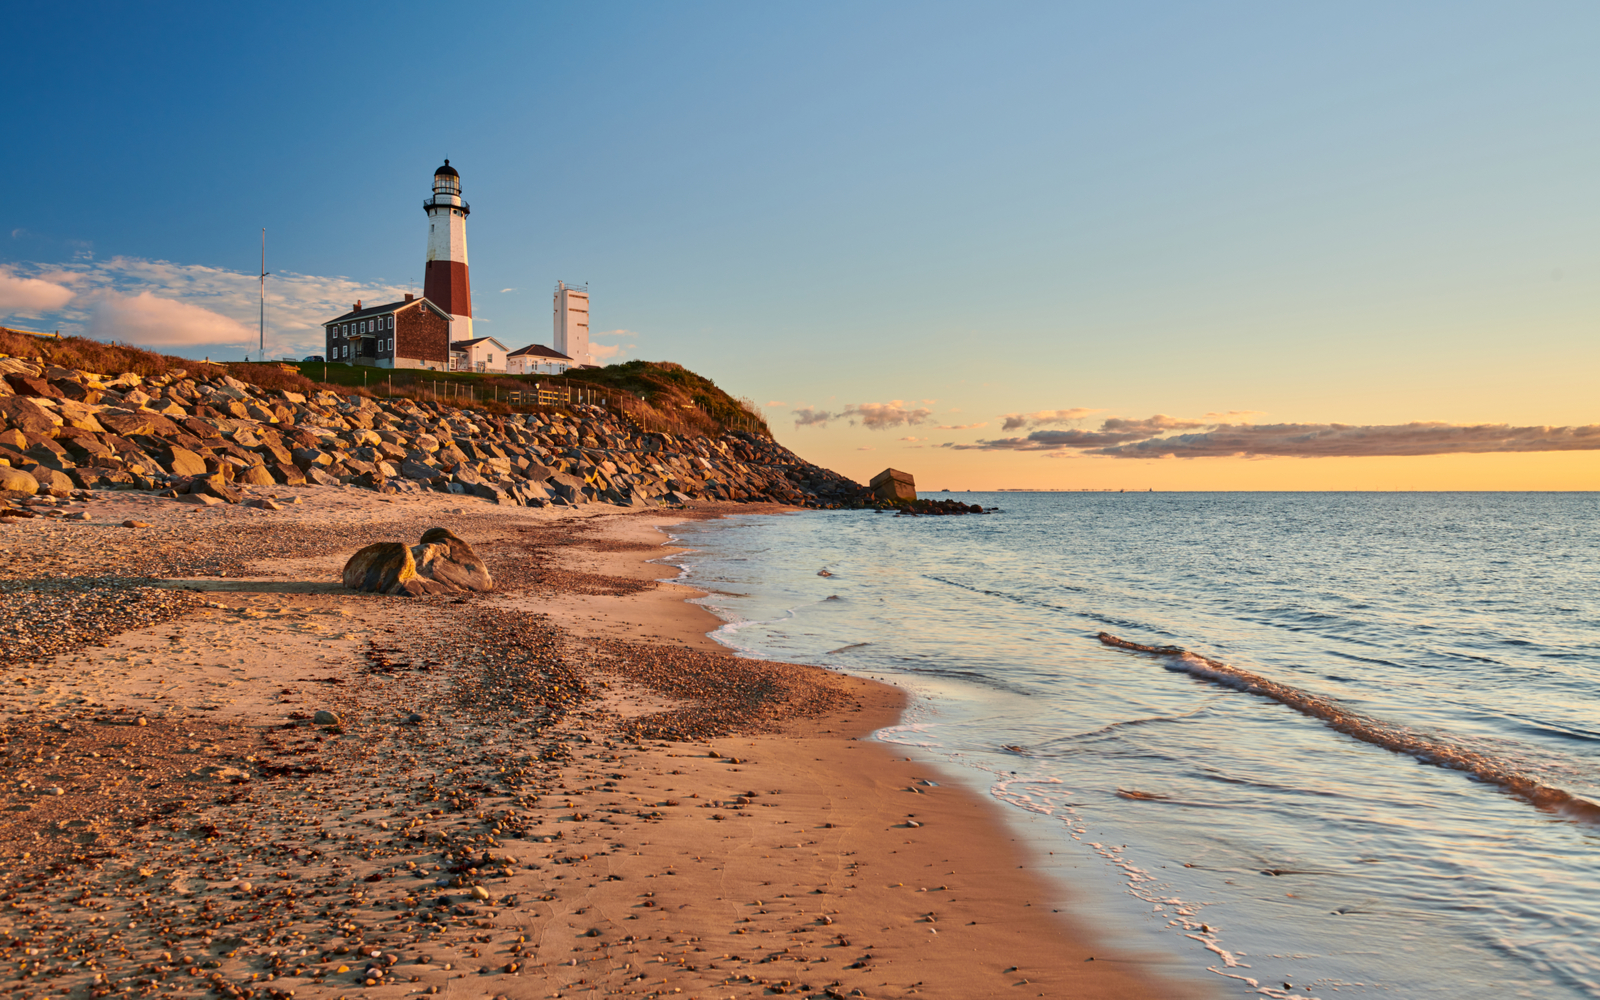 Where to Stay in the Hamptons | Bes Areas & Hotels